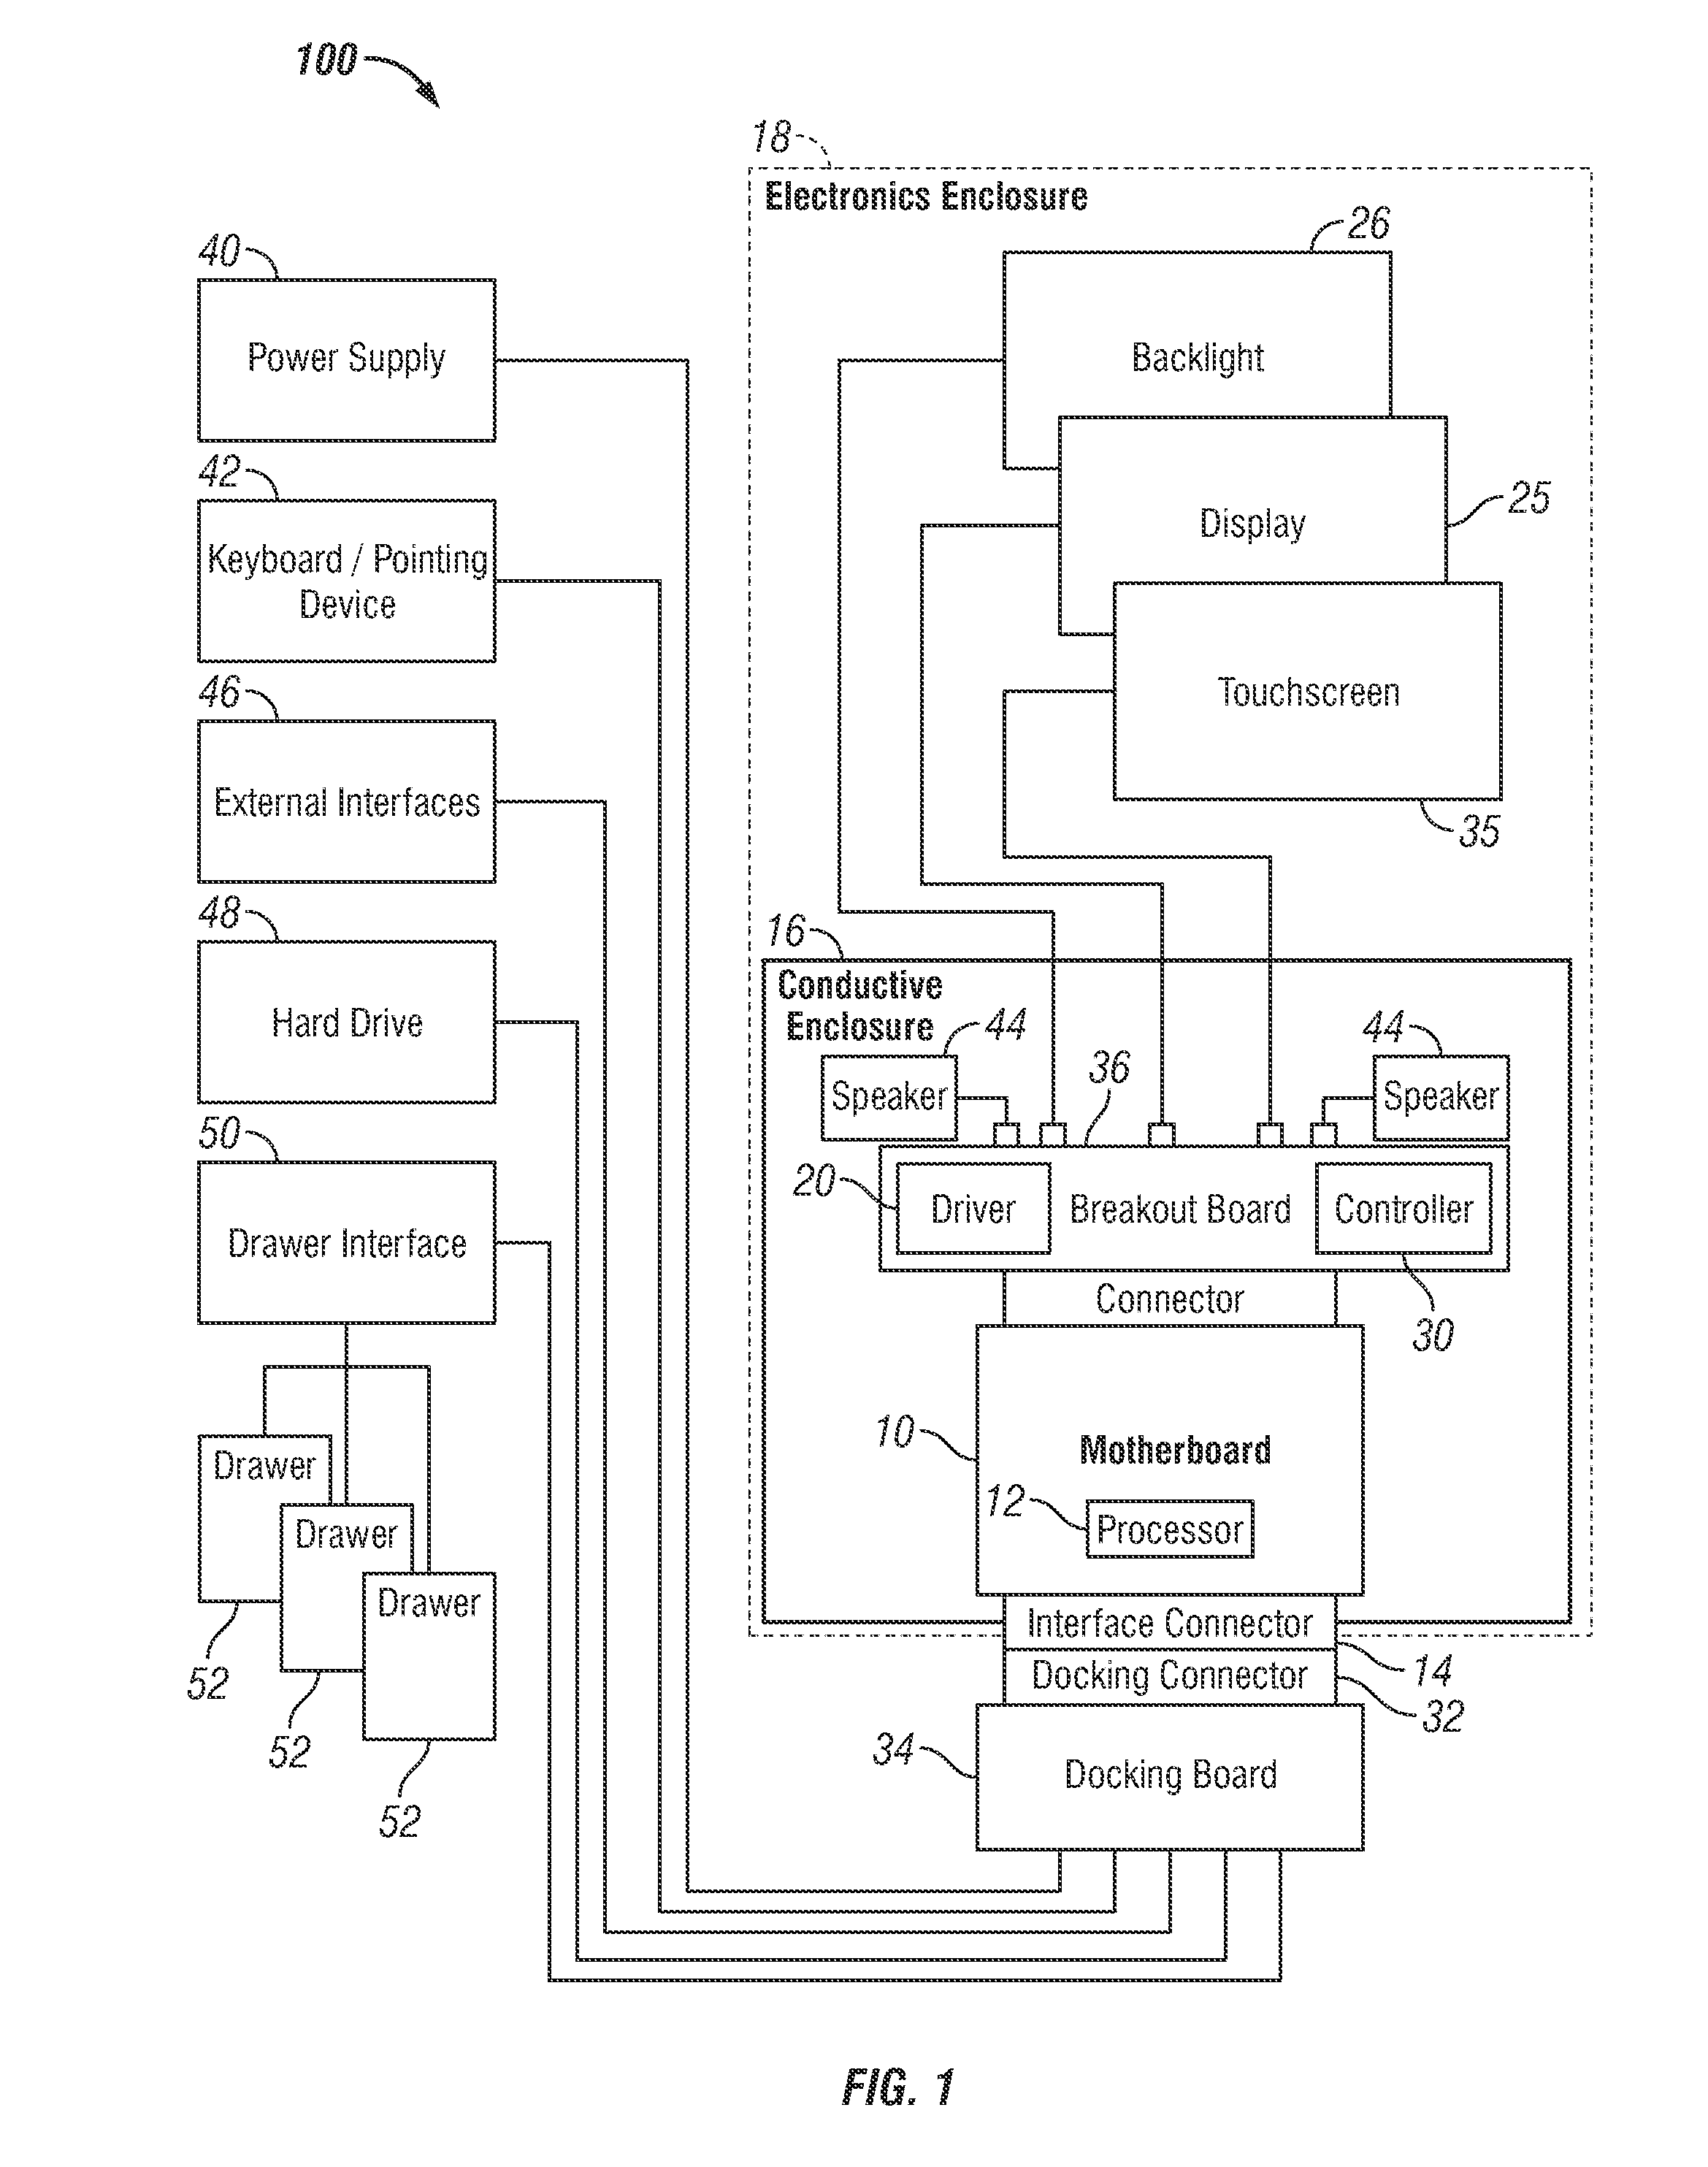 Passive cooling and EMI shielding system